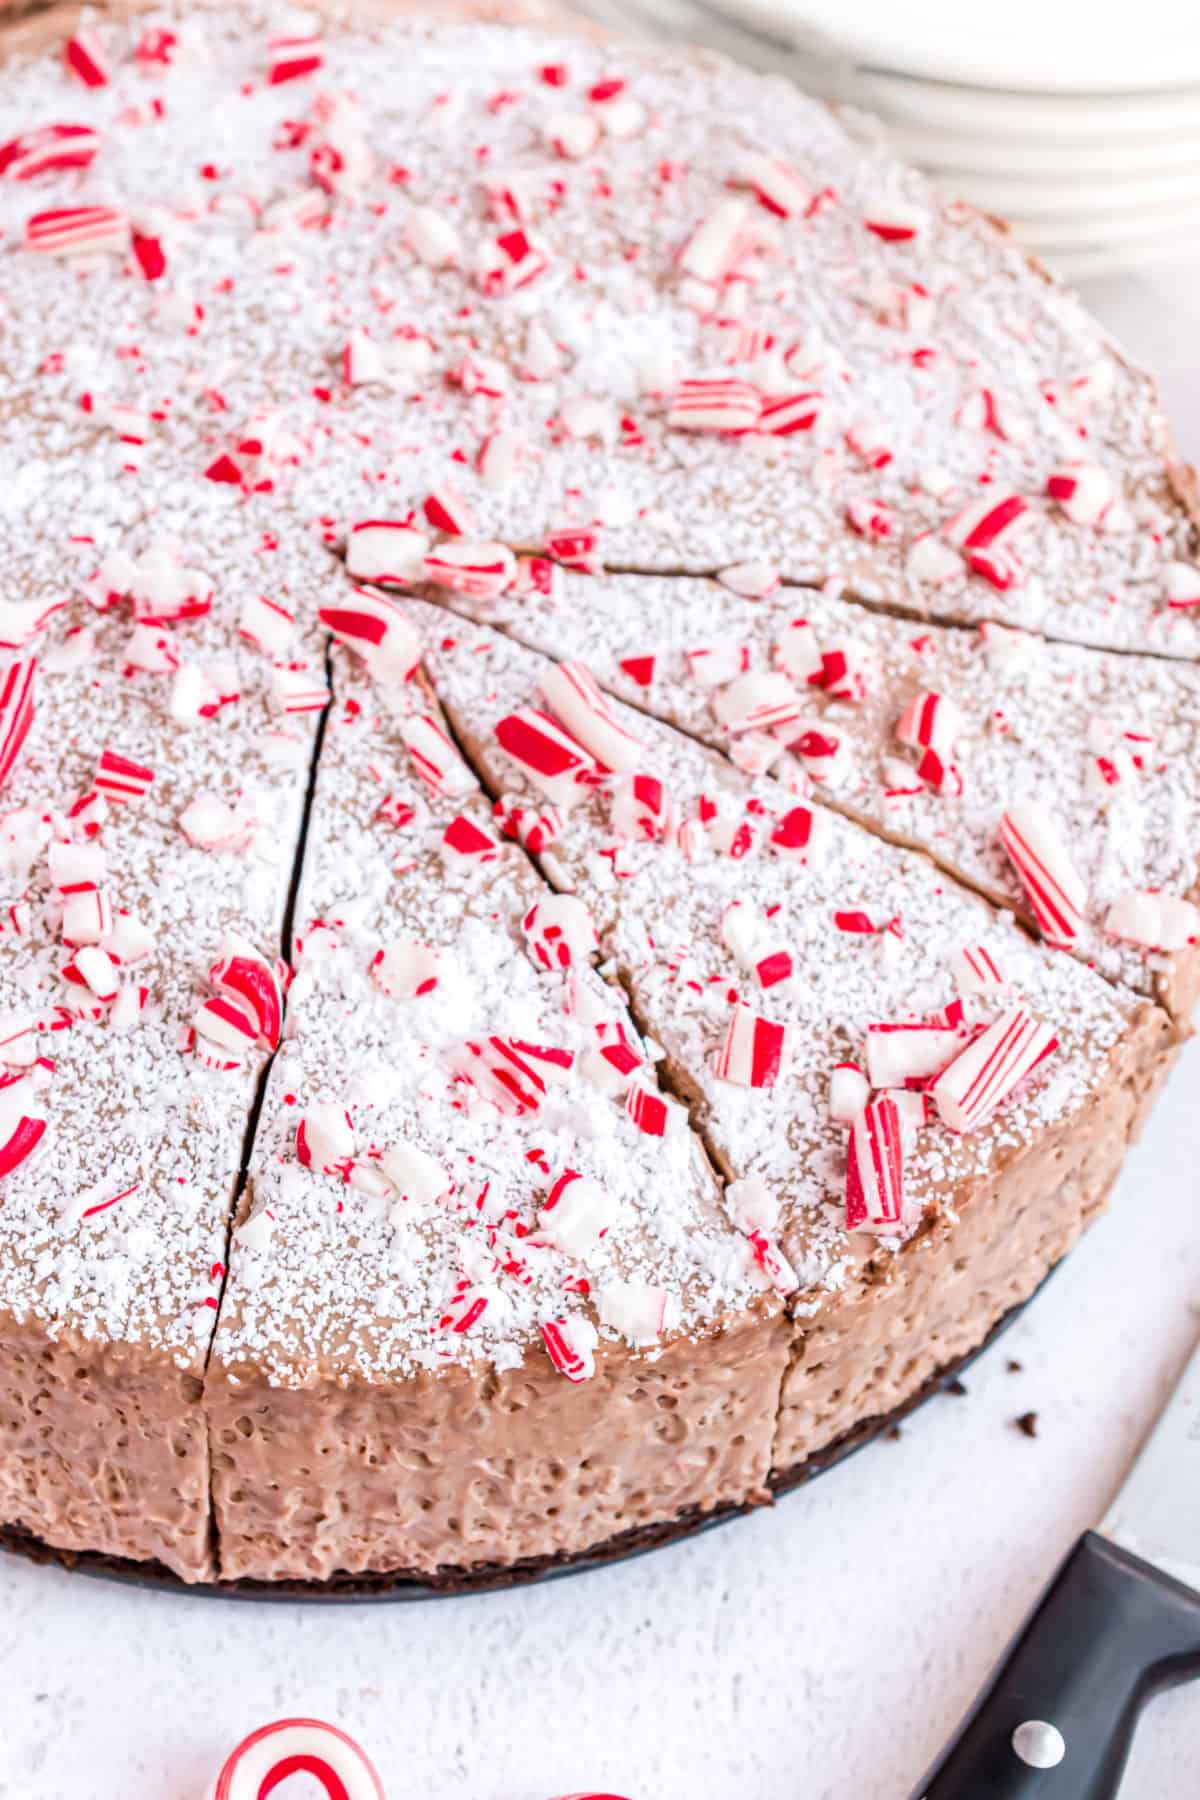 Hazelnut mousse pie topped with peppermint candy.